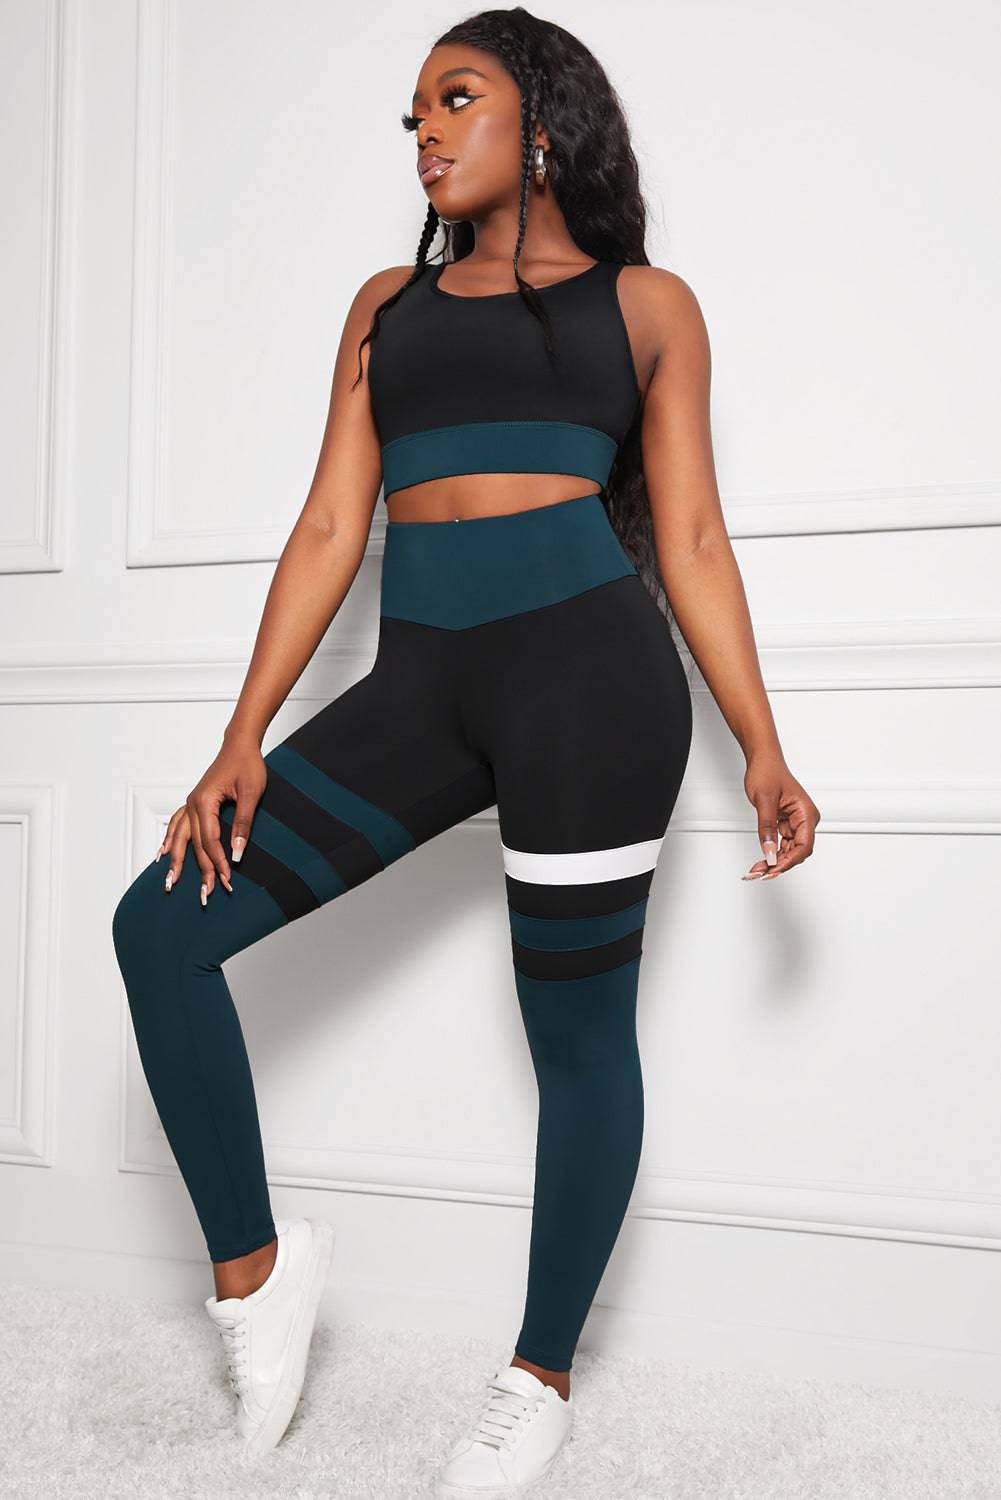 Romance in Motion - Embrace your beauty with our Striped Sports Bra and High Waisted Yoga Leggings Set - Elegant V-neckline, luscious blend of polyester and spandex, and high waisted leggings that hug curves for a smooth, flattering fit. - Guy Christopher